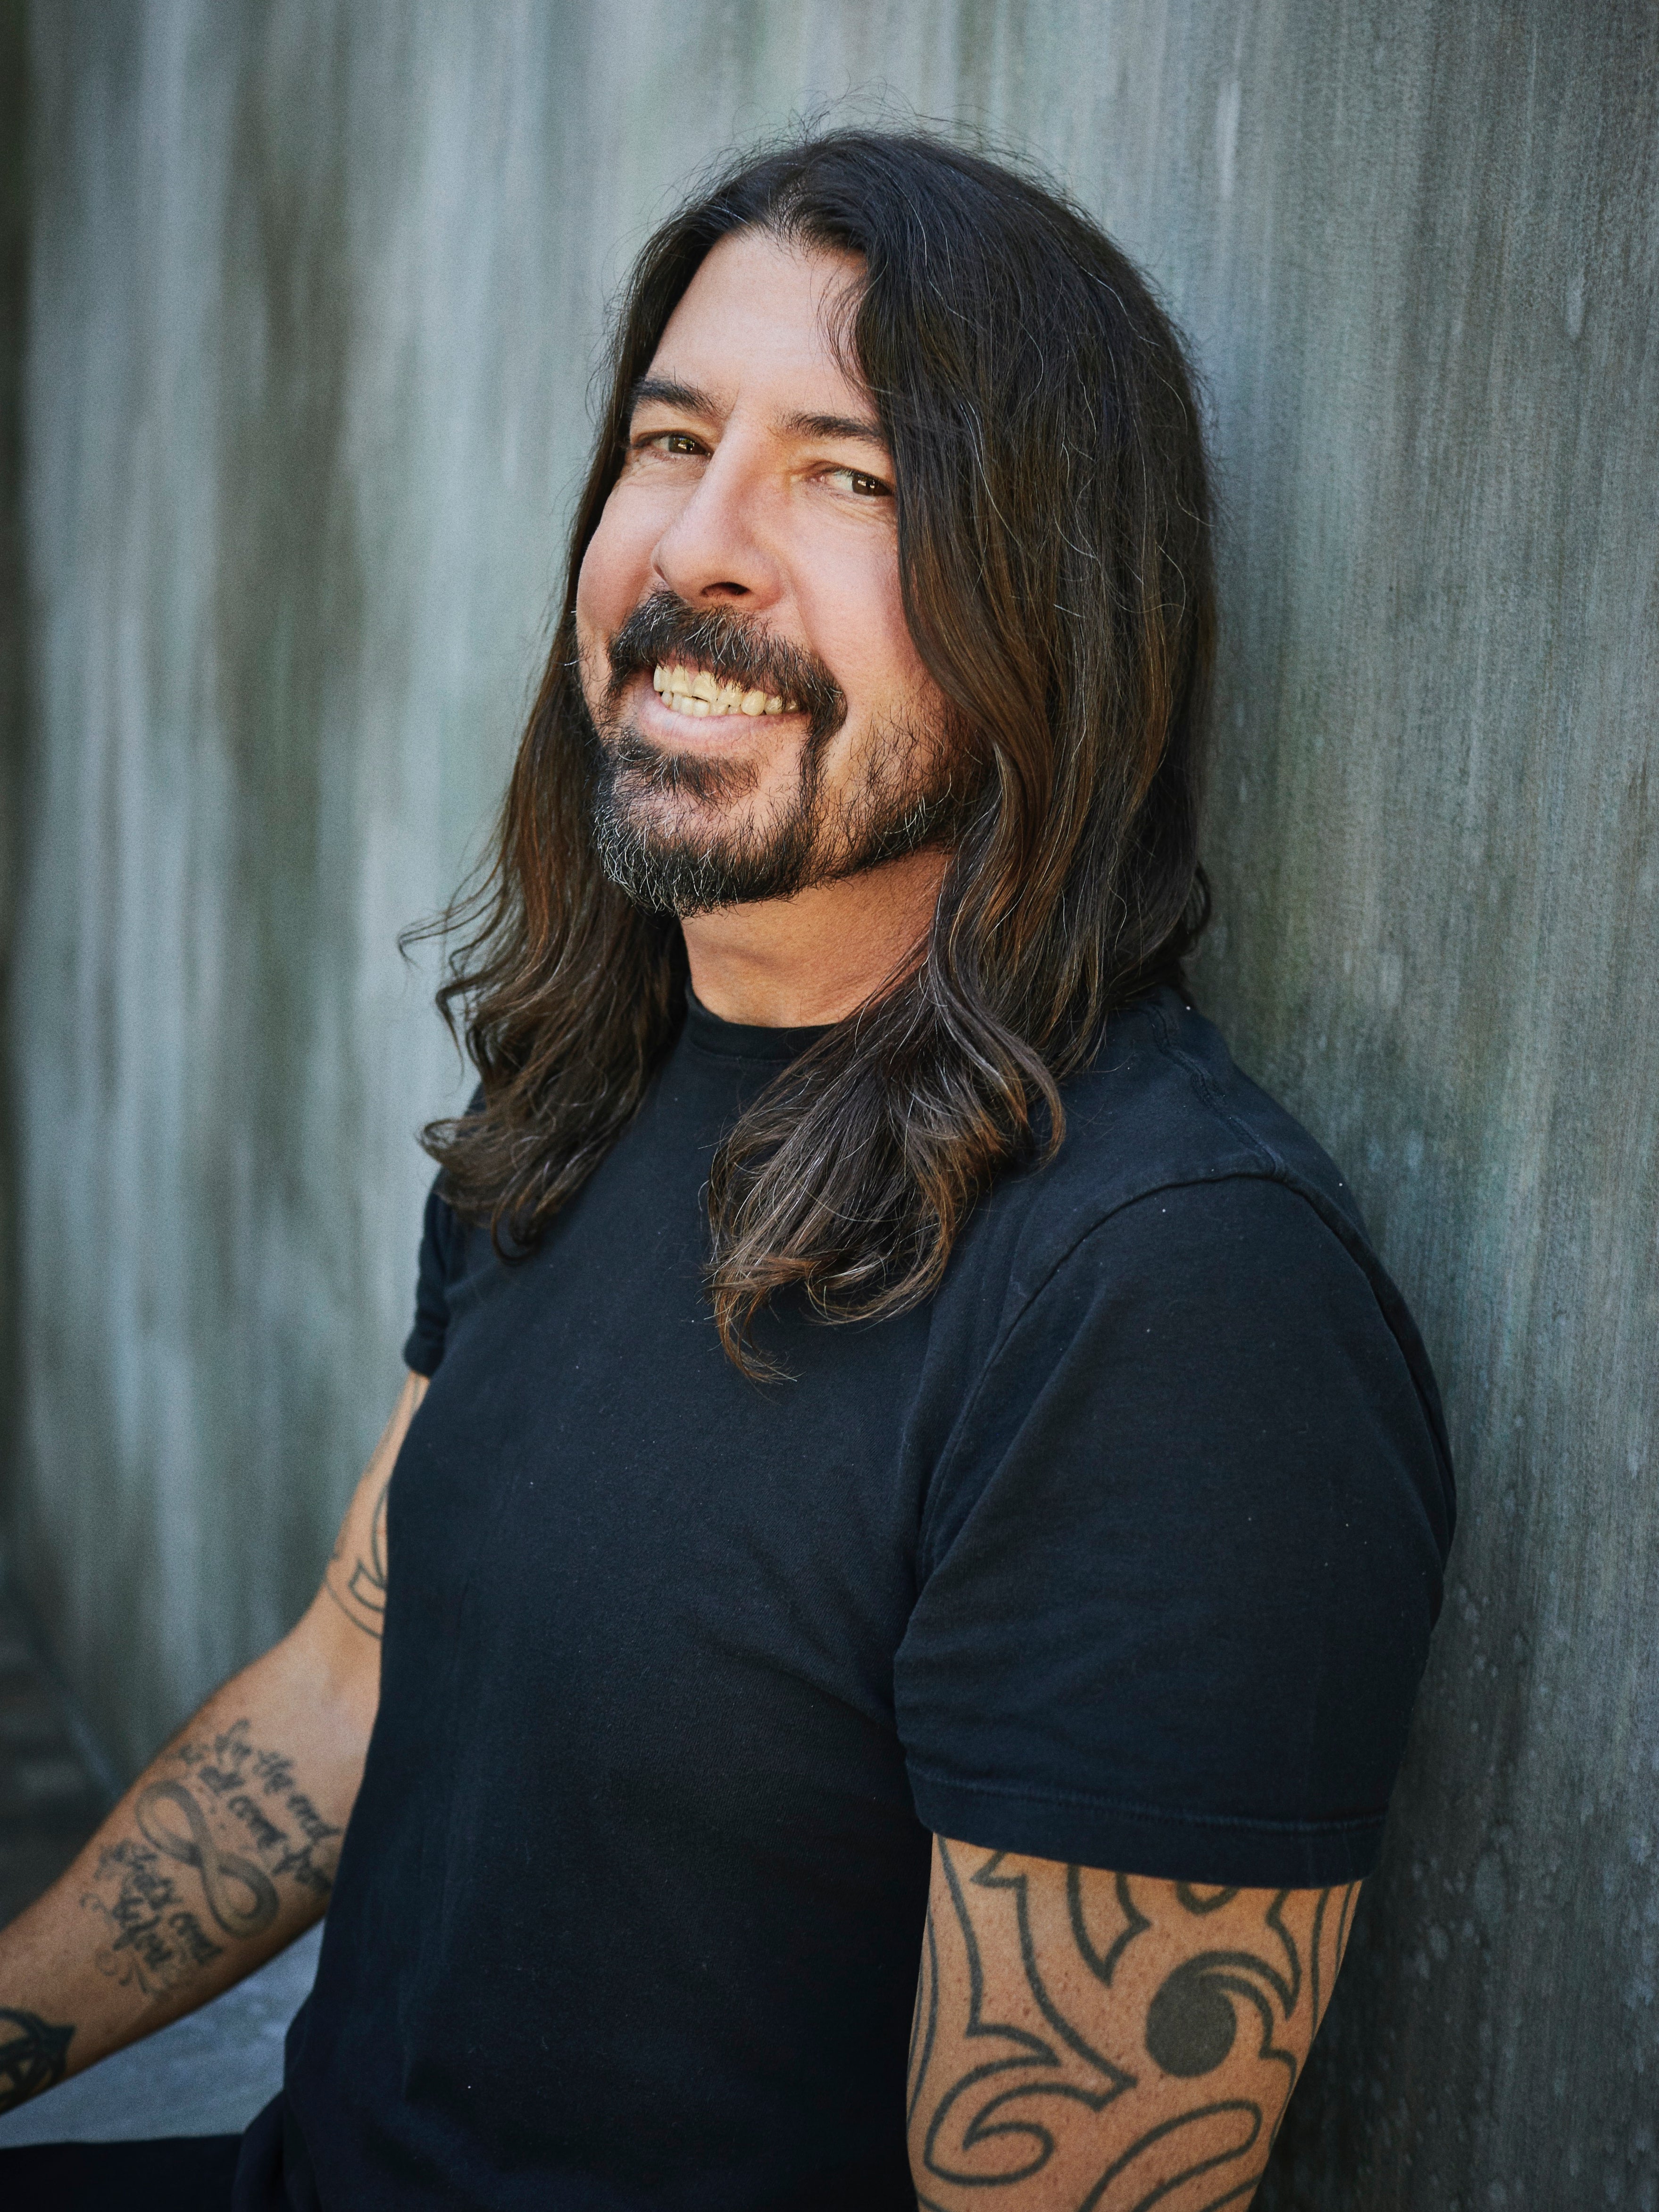 Dave Grohl was one of the first to recognise Billie Eilish as the future of pop, suggesting that her impact on Gen Z was comparable to that of Nirvana and punk on Gen X